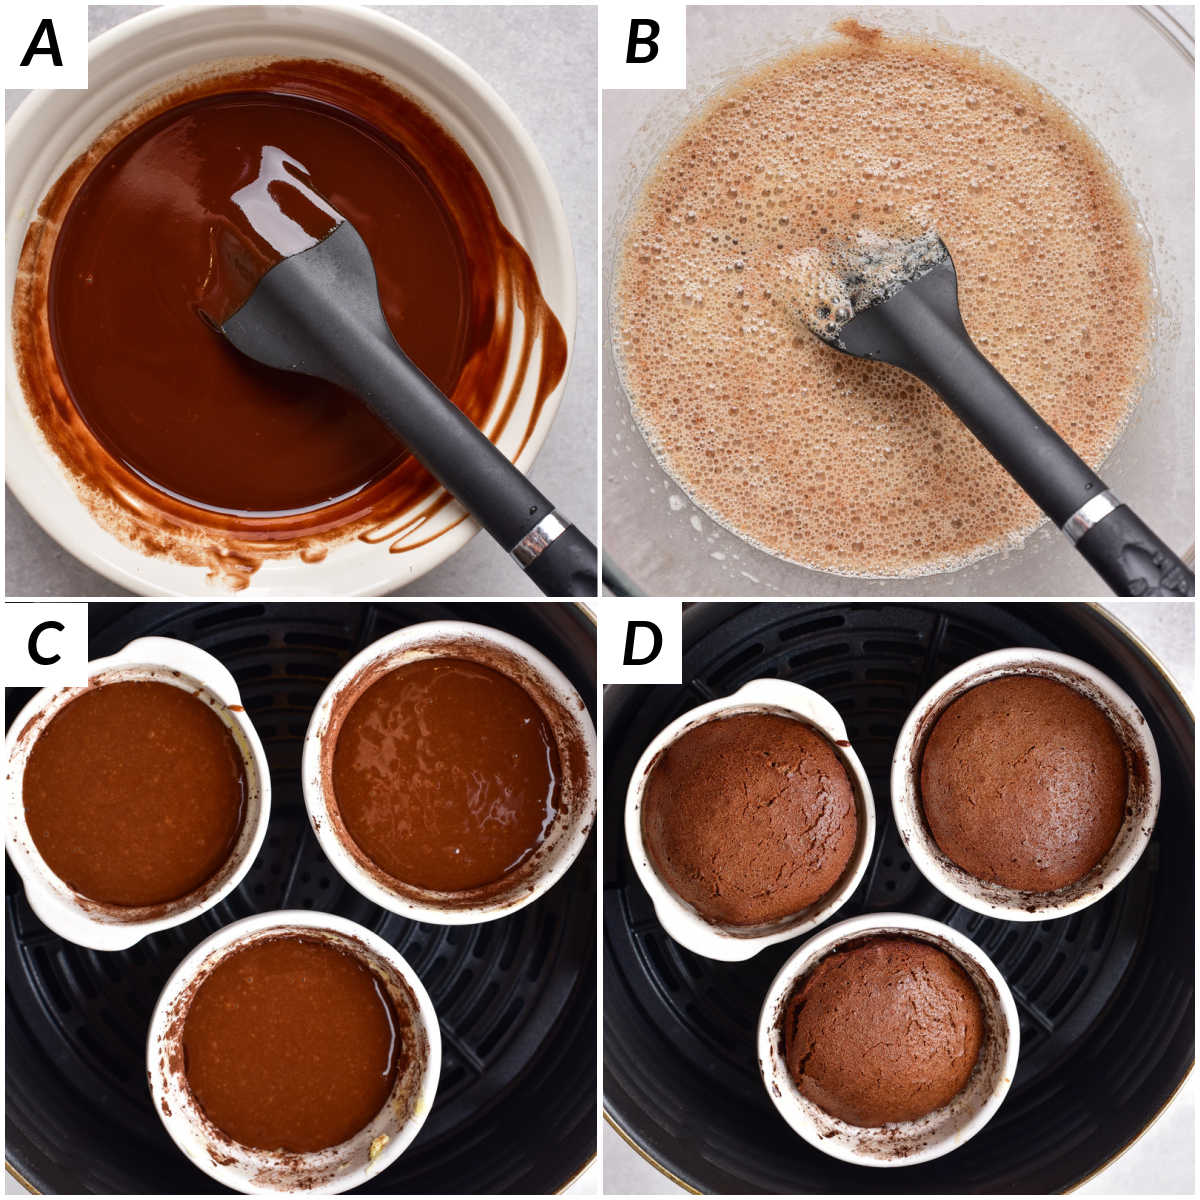 image collage showing some of the steps for making air fryer chocolate lava cake